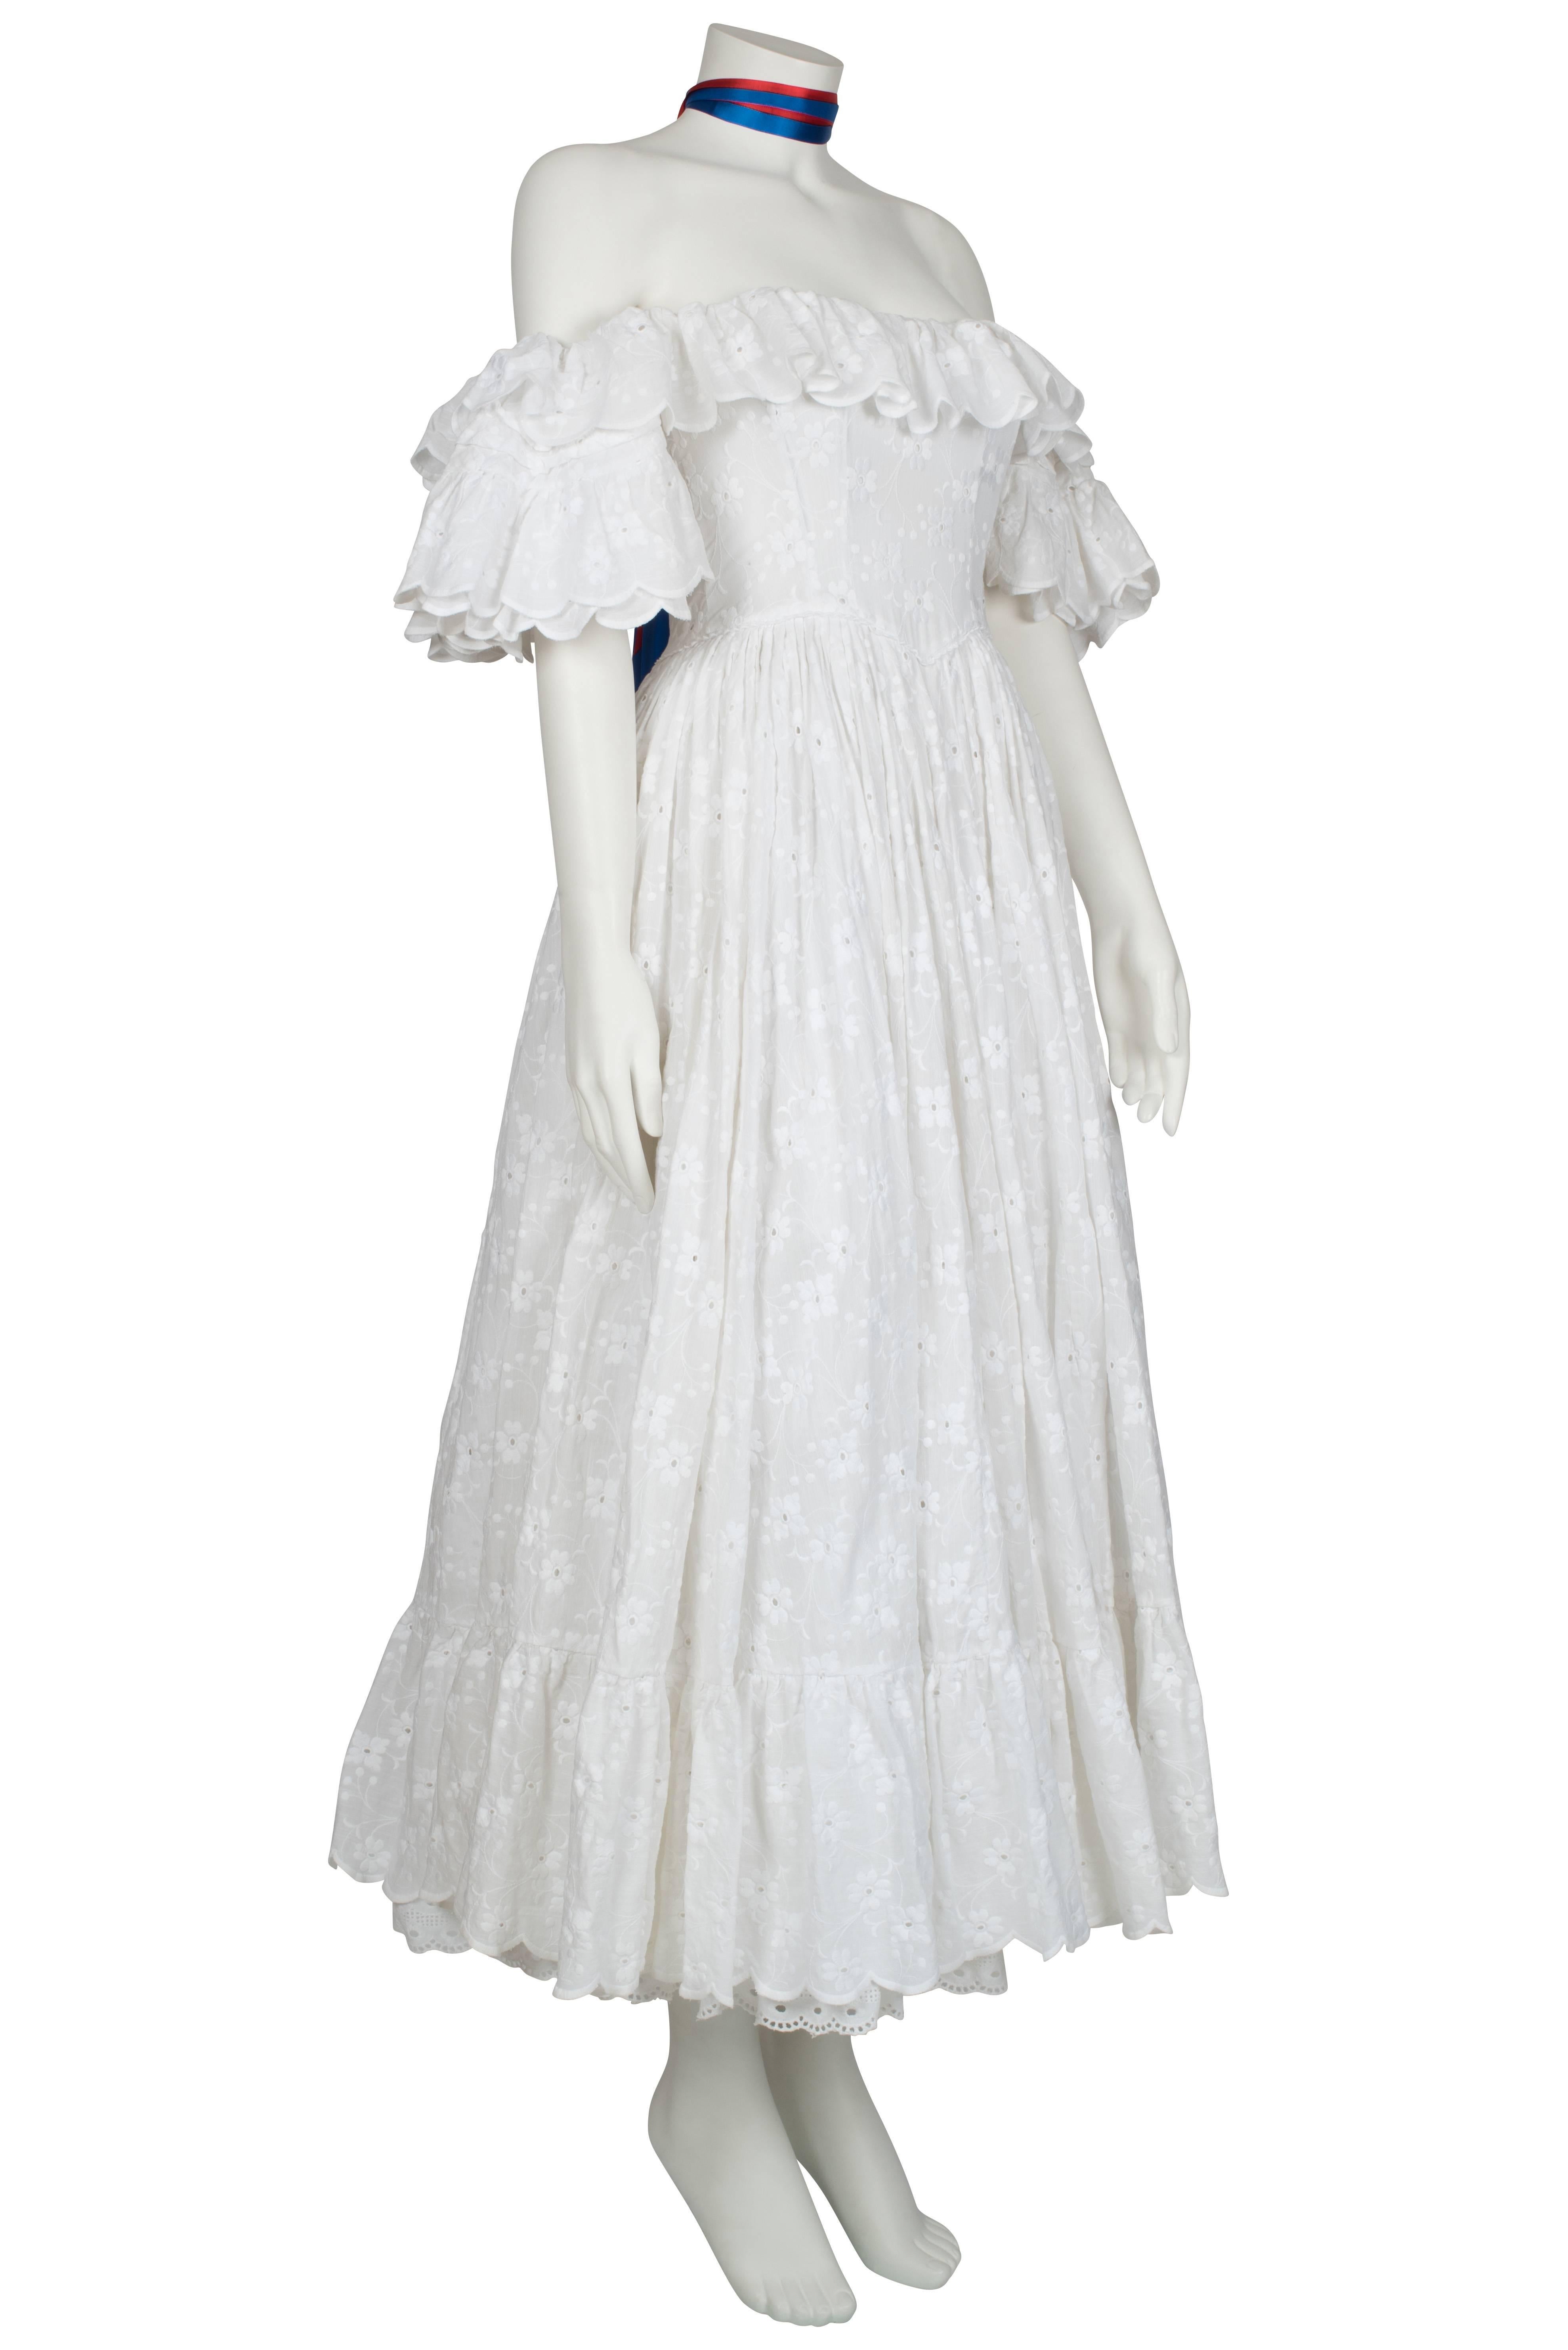 A one-of-a-kind Ossie Clark couture white broderie anglaise cotton full-length dress. This dress was custom made for Miranda Quarry to wear to the American Independence Bicentennial Ball in July 1976. This particularly heavy dress has a fitted